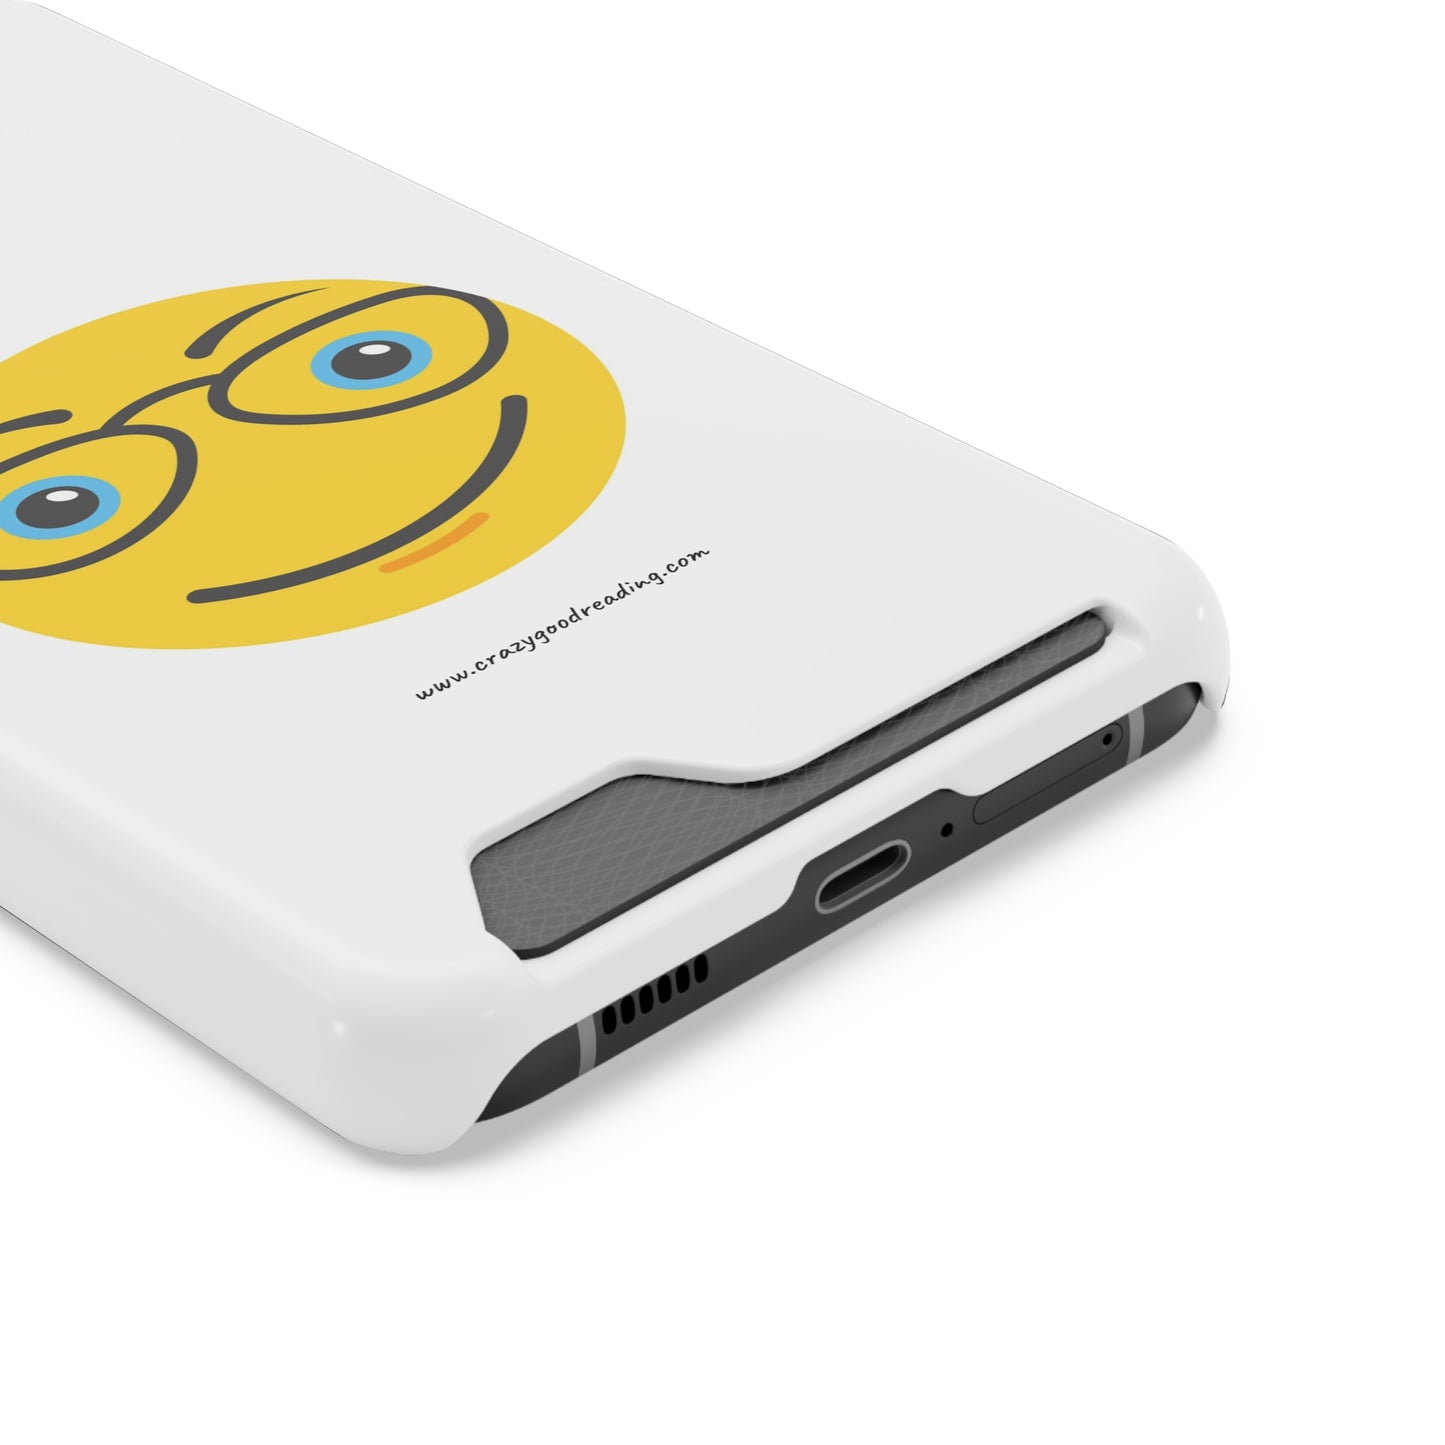 Phone Case With Card Holder "Smiley Face with Glasses"